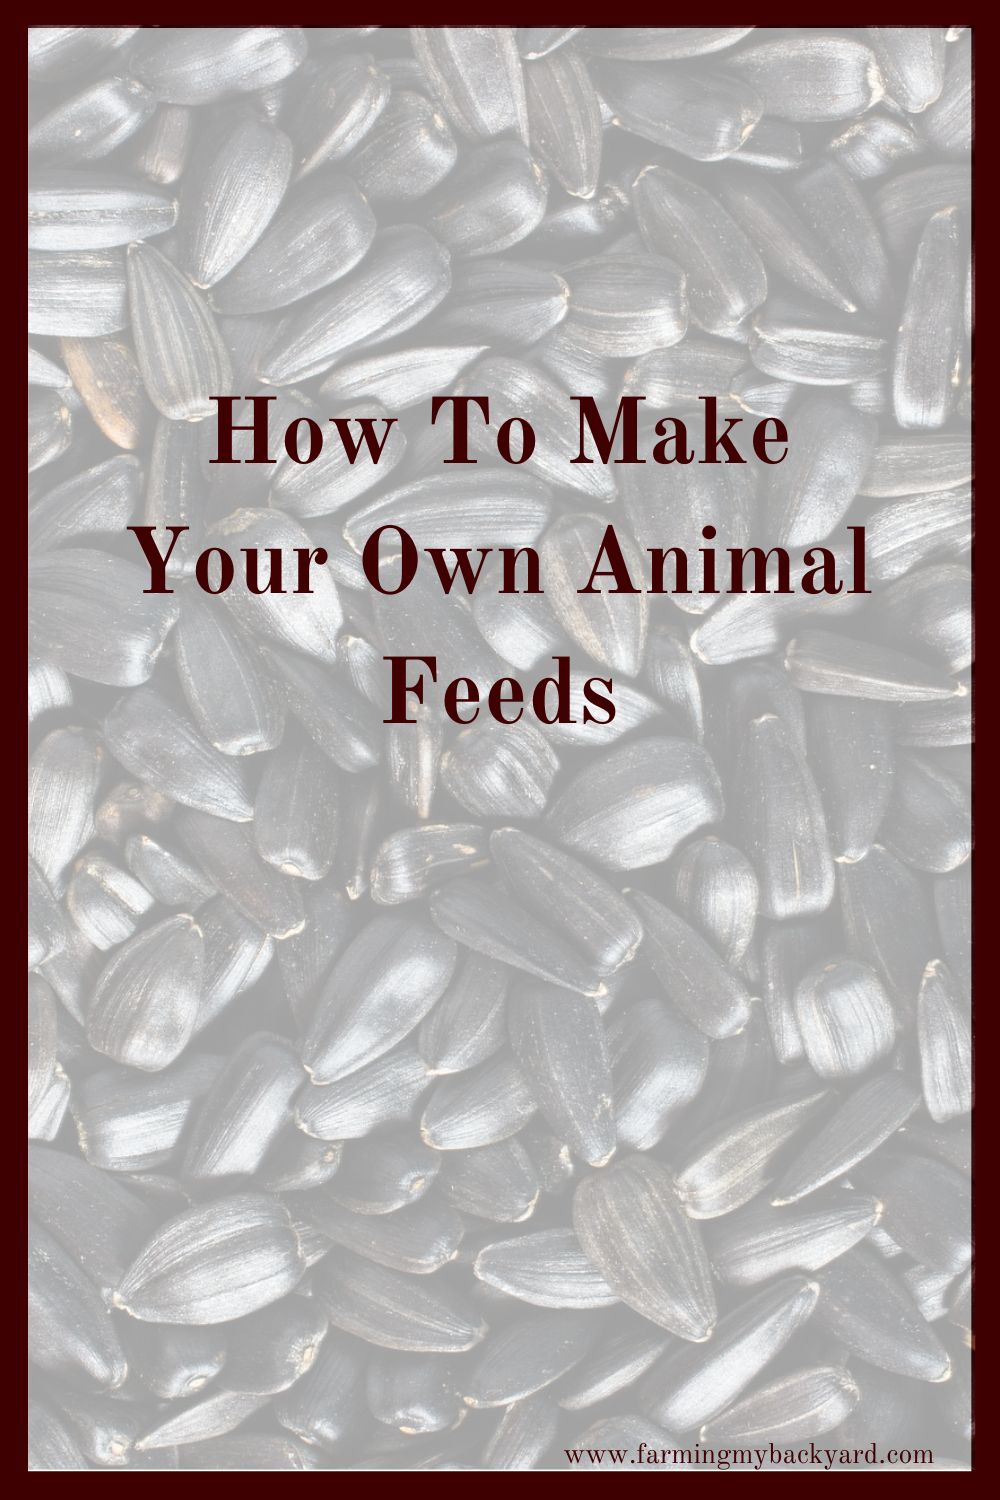 You can make your own animal feeds for your goats, rabbits, or chickens!  You can also supplement your purchased feeds for more nutrition!